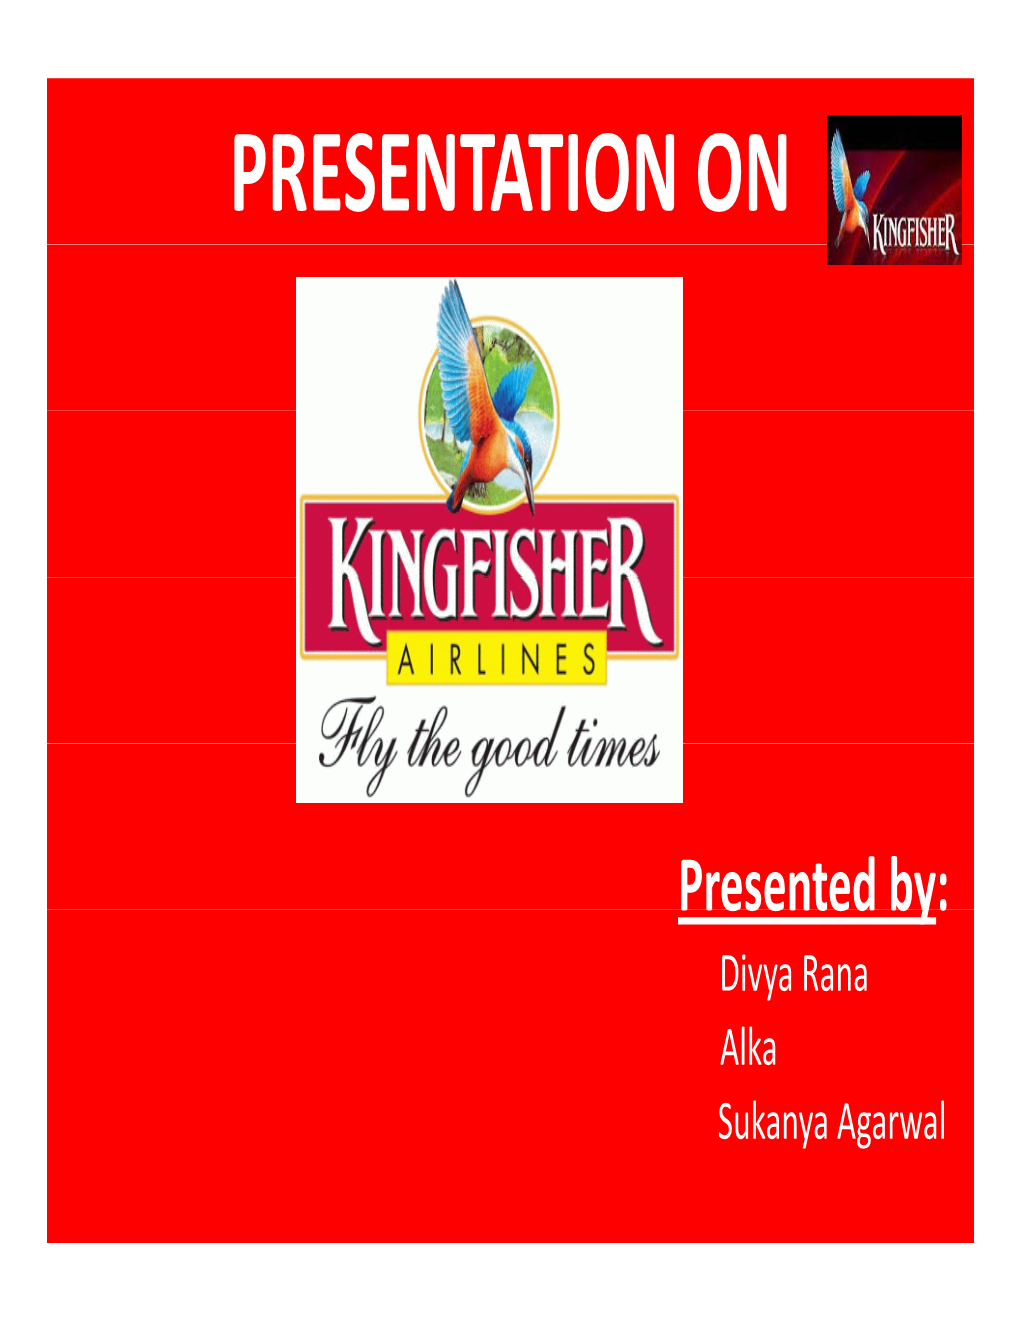 About Kingfisher Airlines